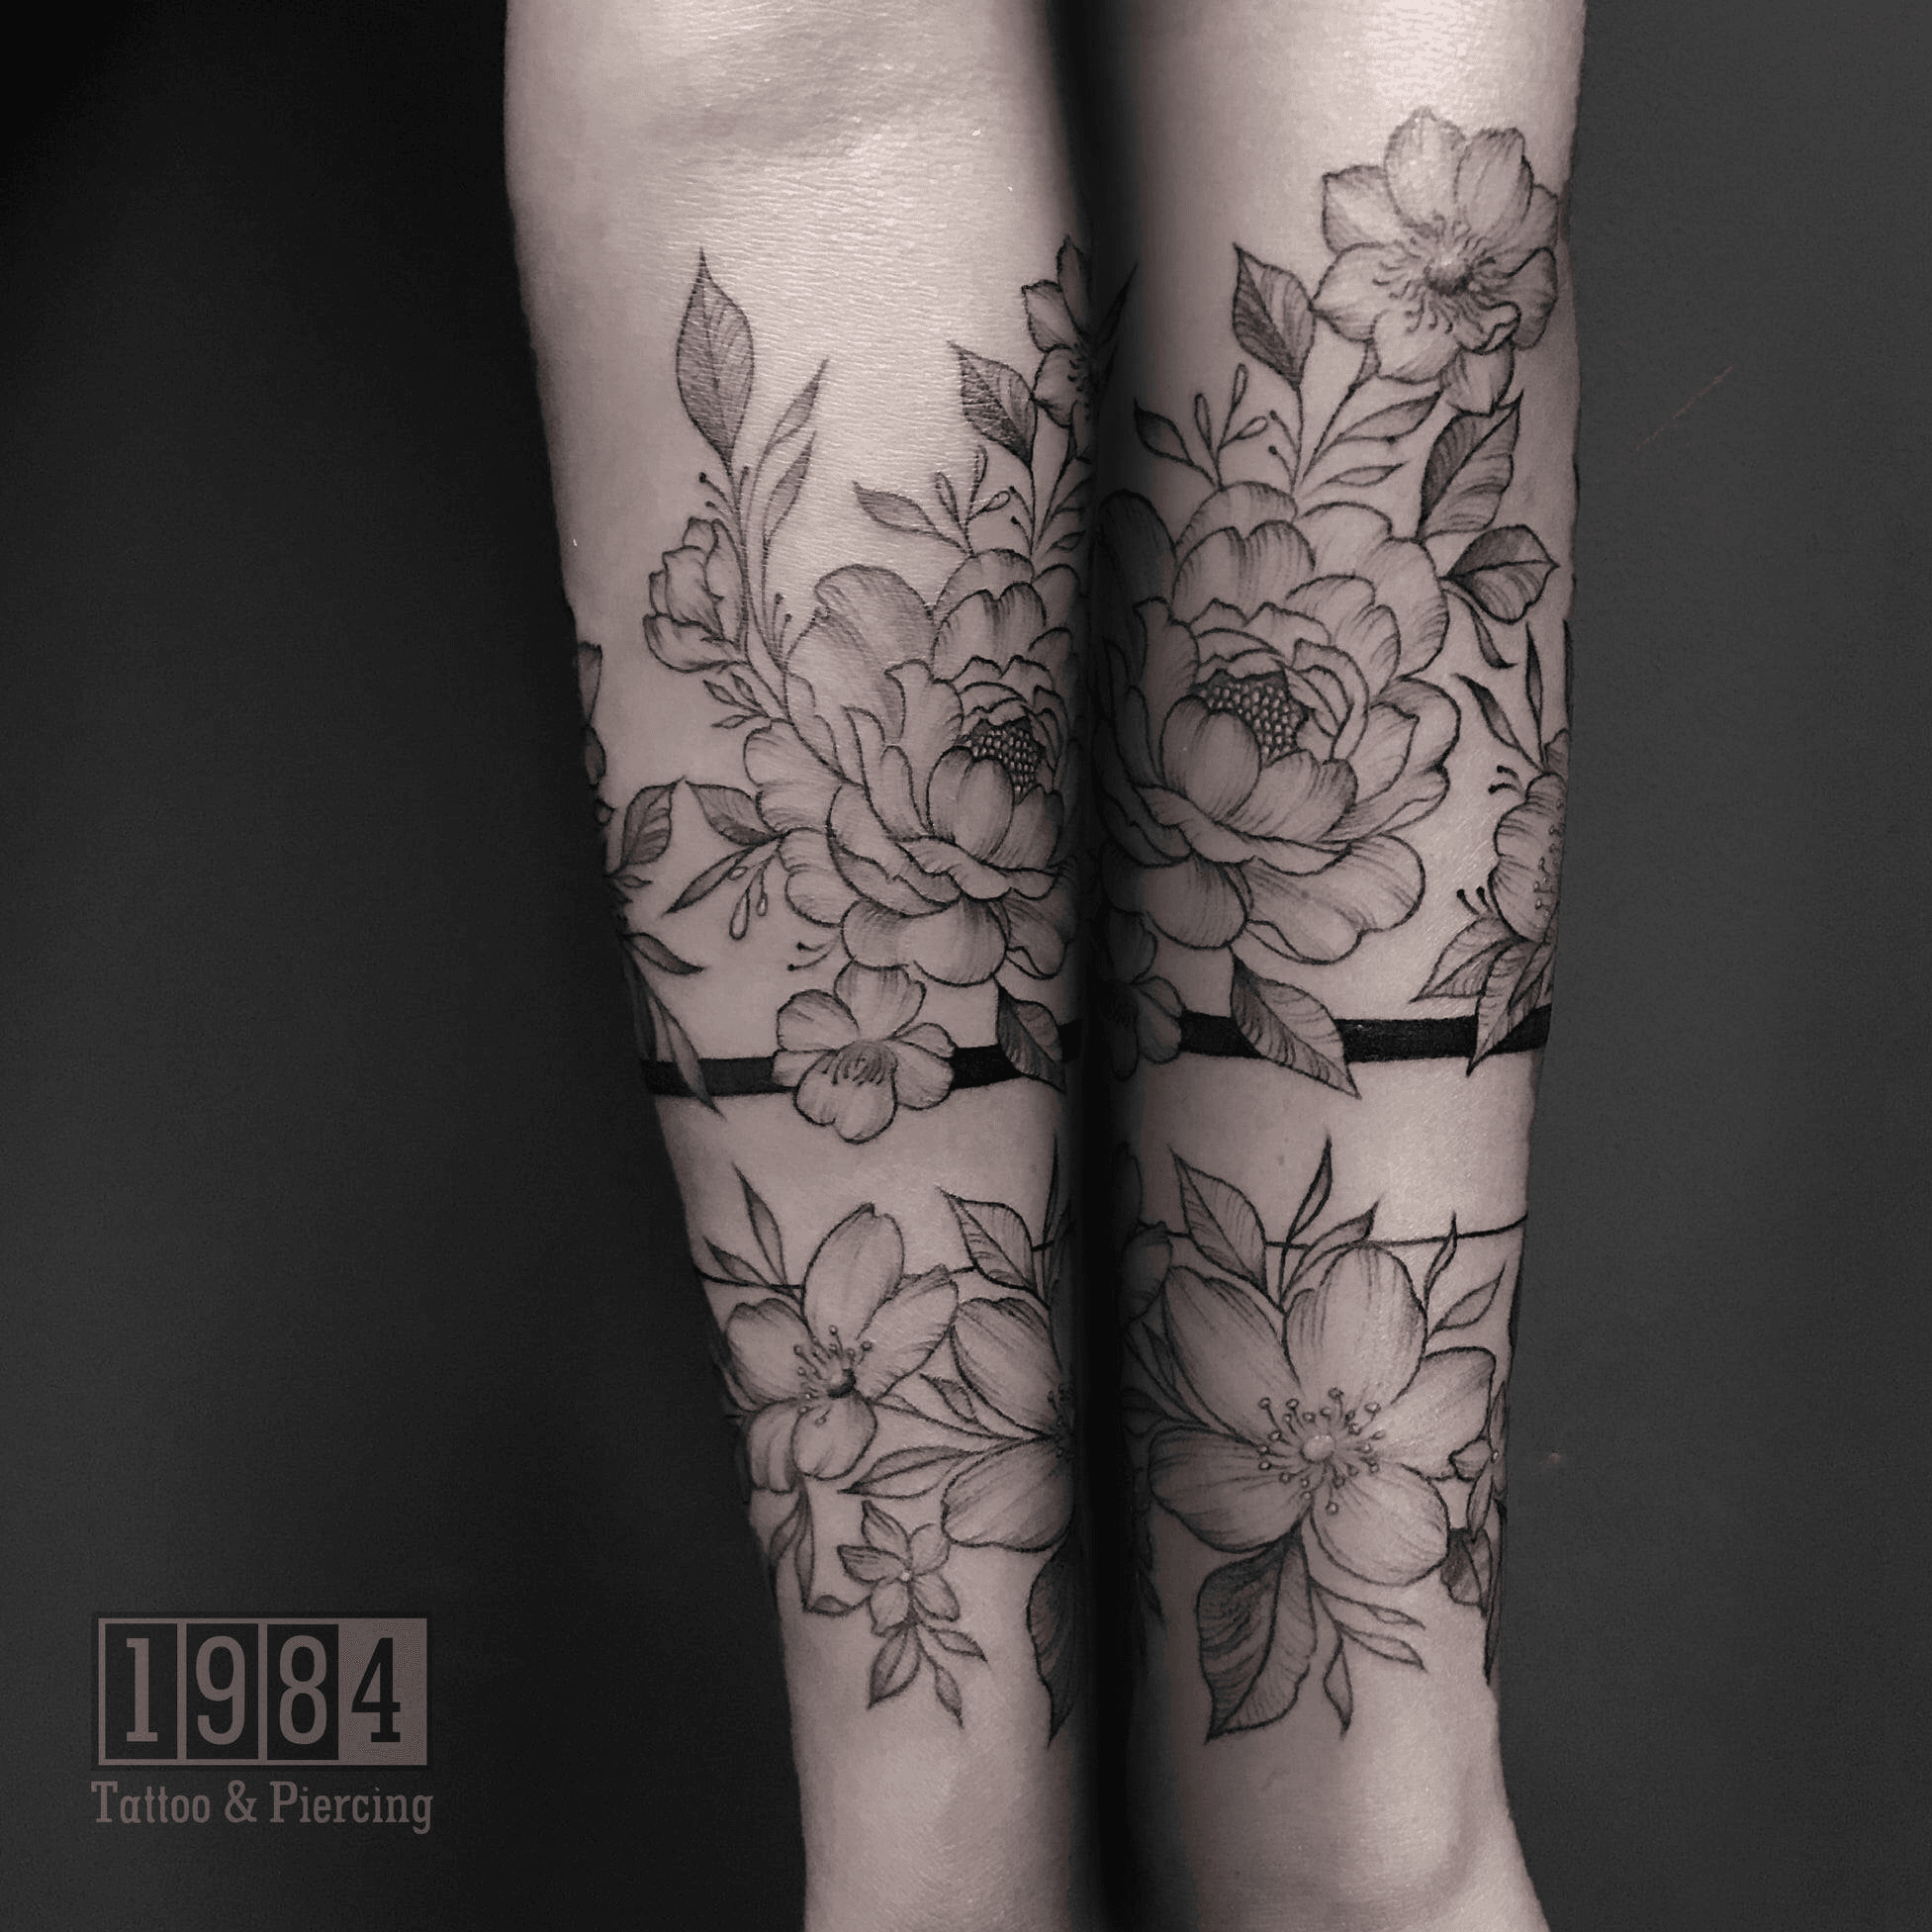 floral arm band design  Line art tattoos Floral tattoo sleeve Band  tattoo designs